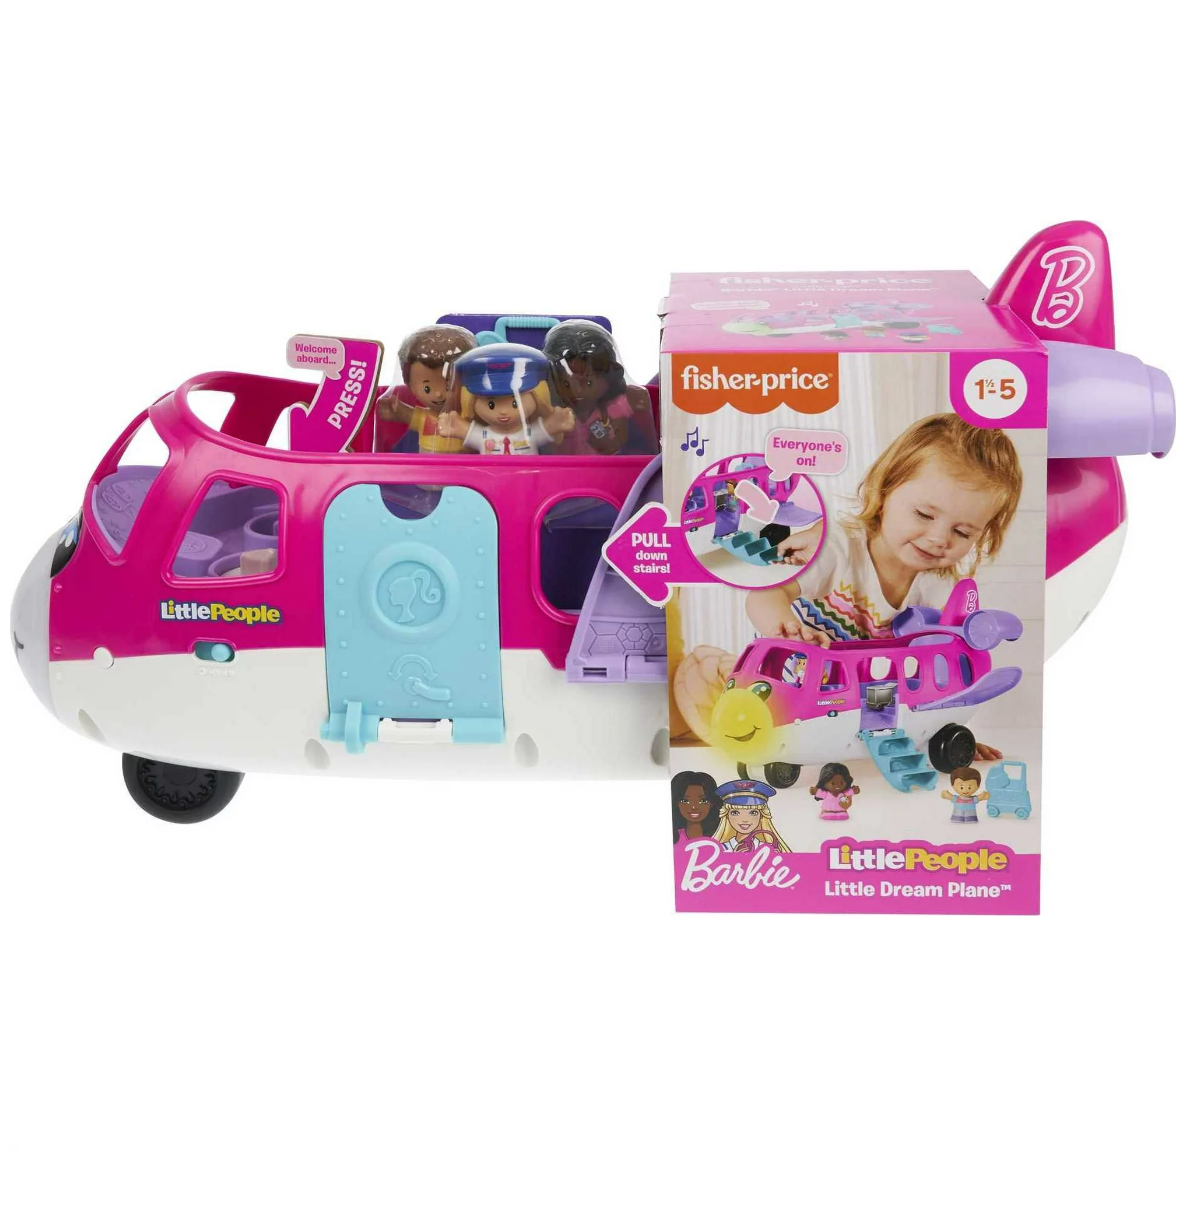 Little People Barbie Little Dream Plane Toy with Lights Music and 3 Figures New